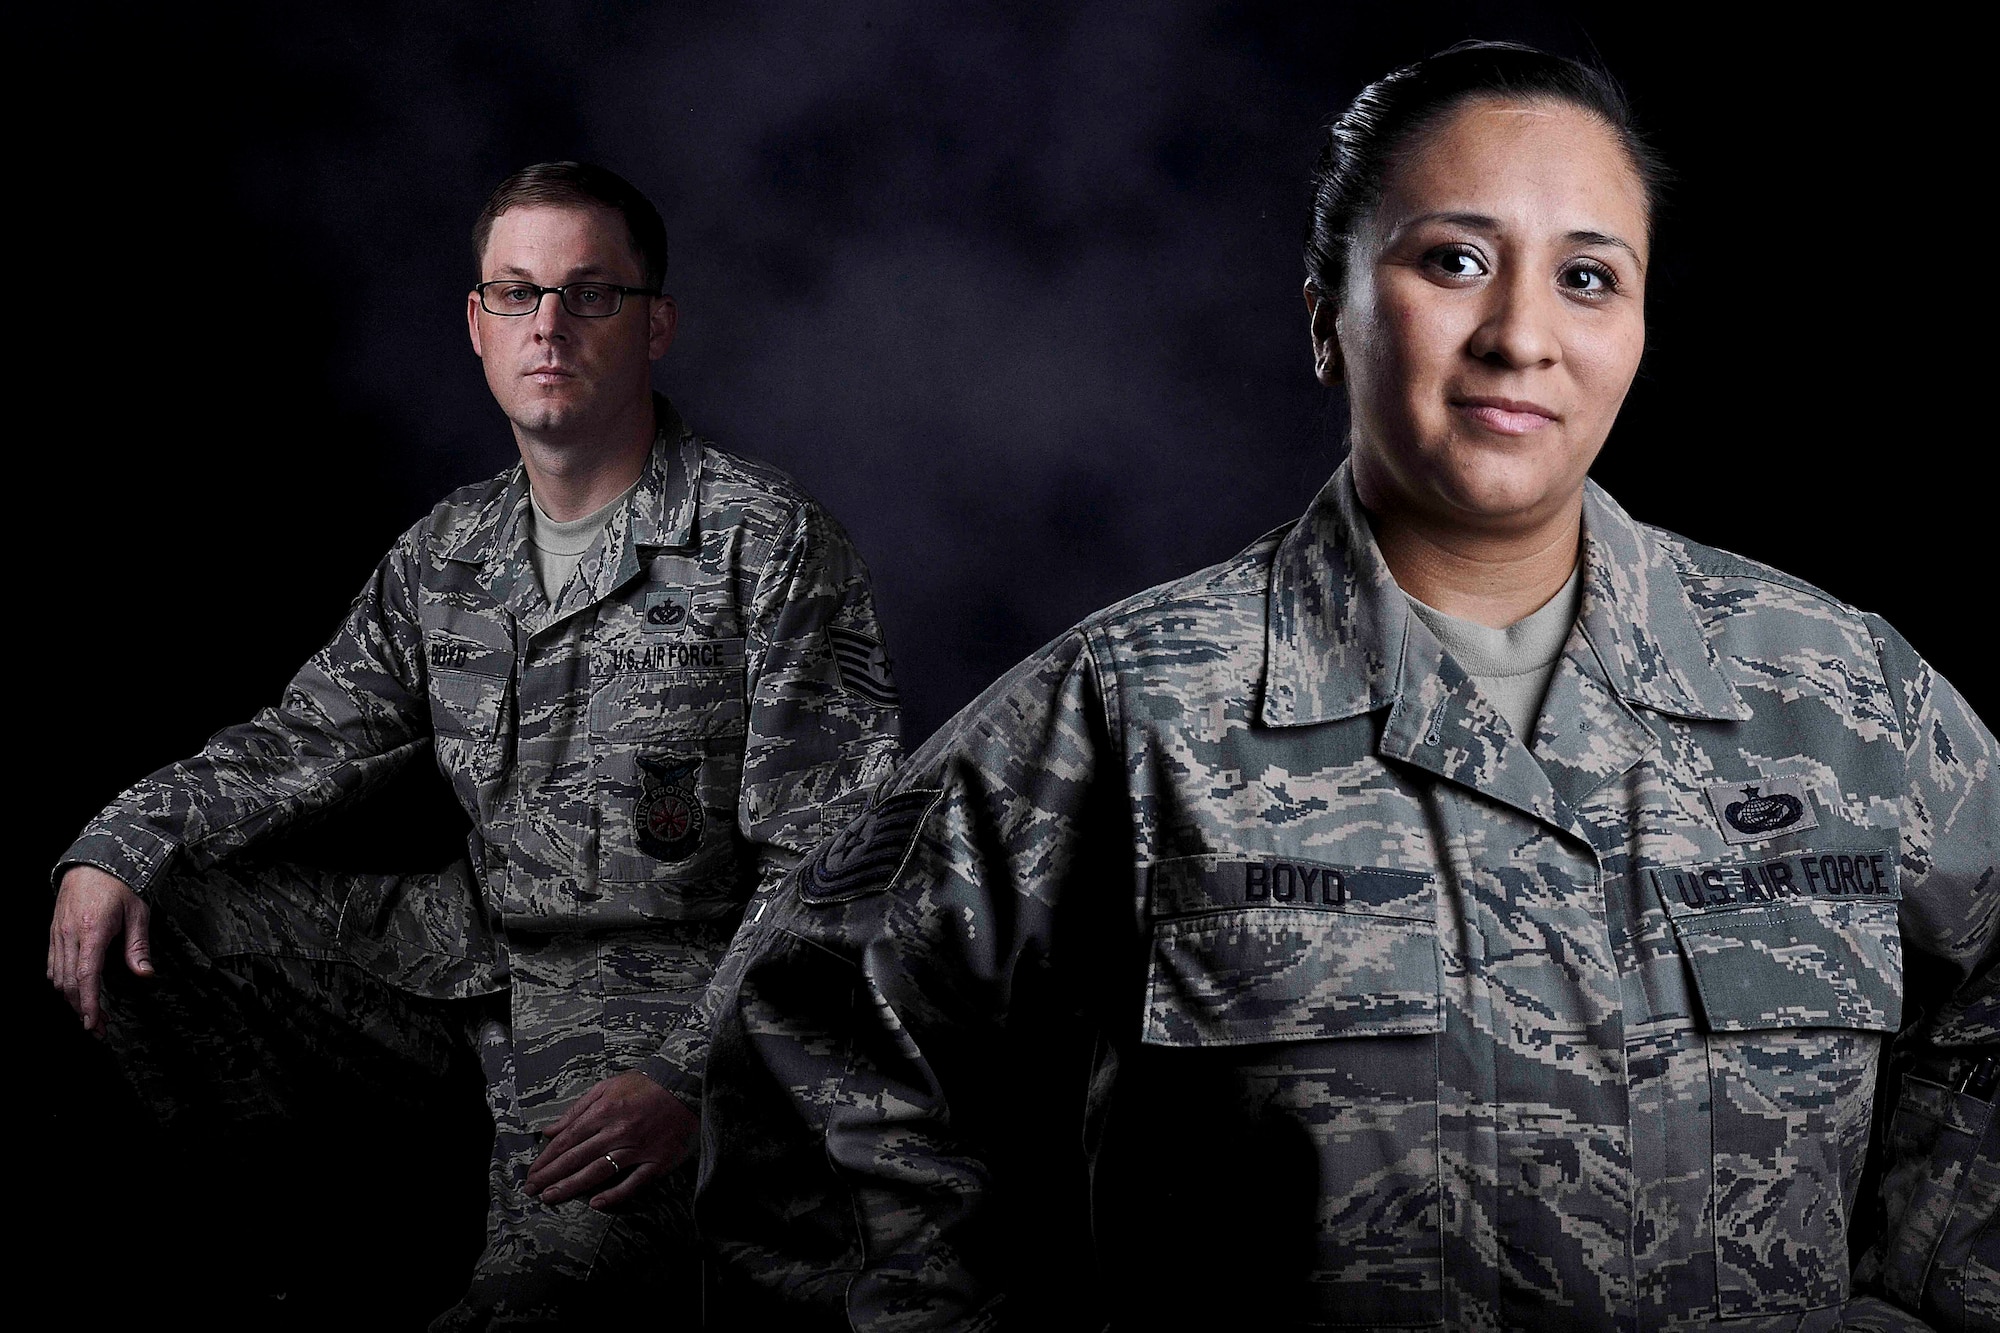 ALTUS AIR FORCE BASE Okla. – U.S. Air Force Tech. Sgt. Ryan Boyd, 97th Civil Engineer Squadron deputy fire chief and U.S. Air Force Tech. Sgt. Tesha Boyd, 97th Force Support Squadron NCO in charge of force management, aided victims in a vehicle accident, April 2, 2014. The Boyds were driving along U.S. Highway 87 South heading to San Antonio, Texas when they saw a major vehicle accident involving two adults and three children. The Boyds provided medical assistance while waiting for emergency responders to arrive to the scene. (U.S. Air Force photo by Senior Airman Jesse Lopez/Released)